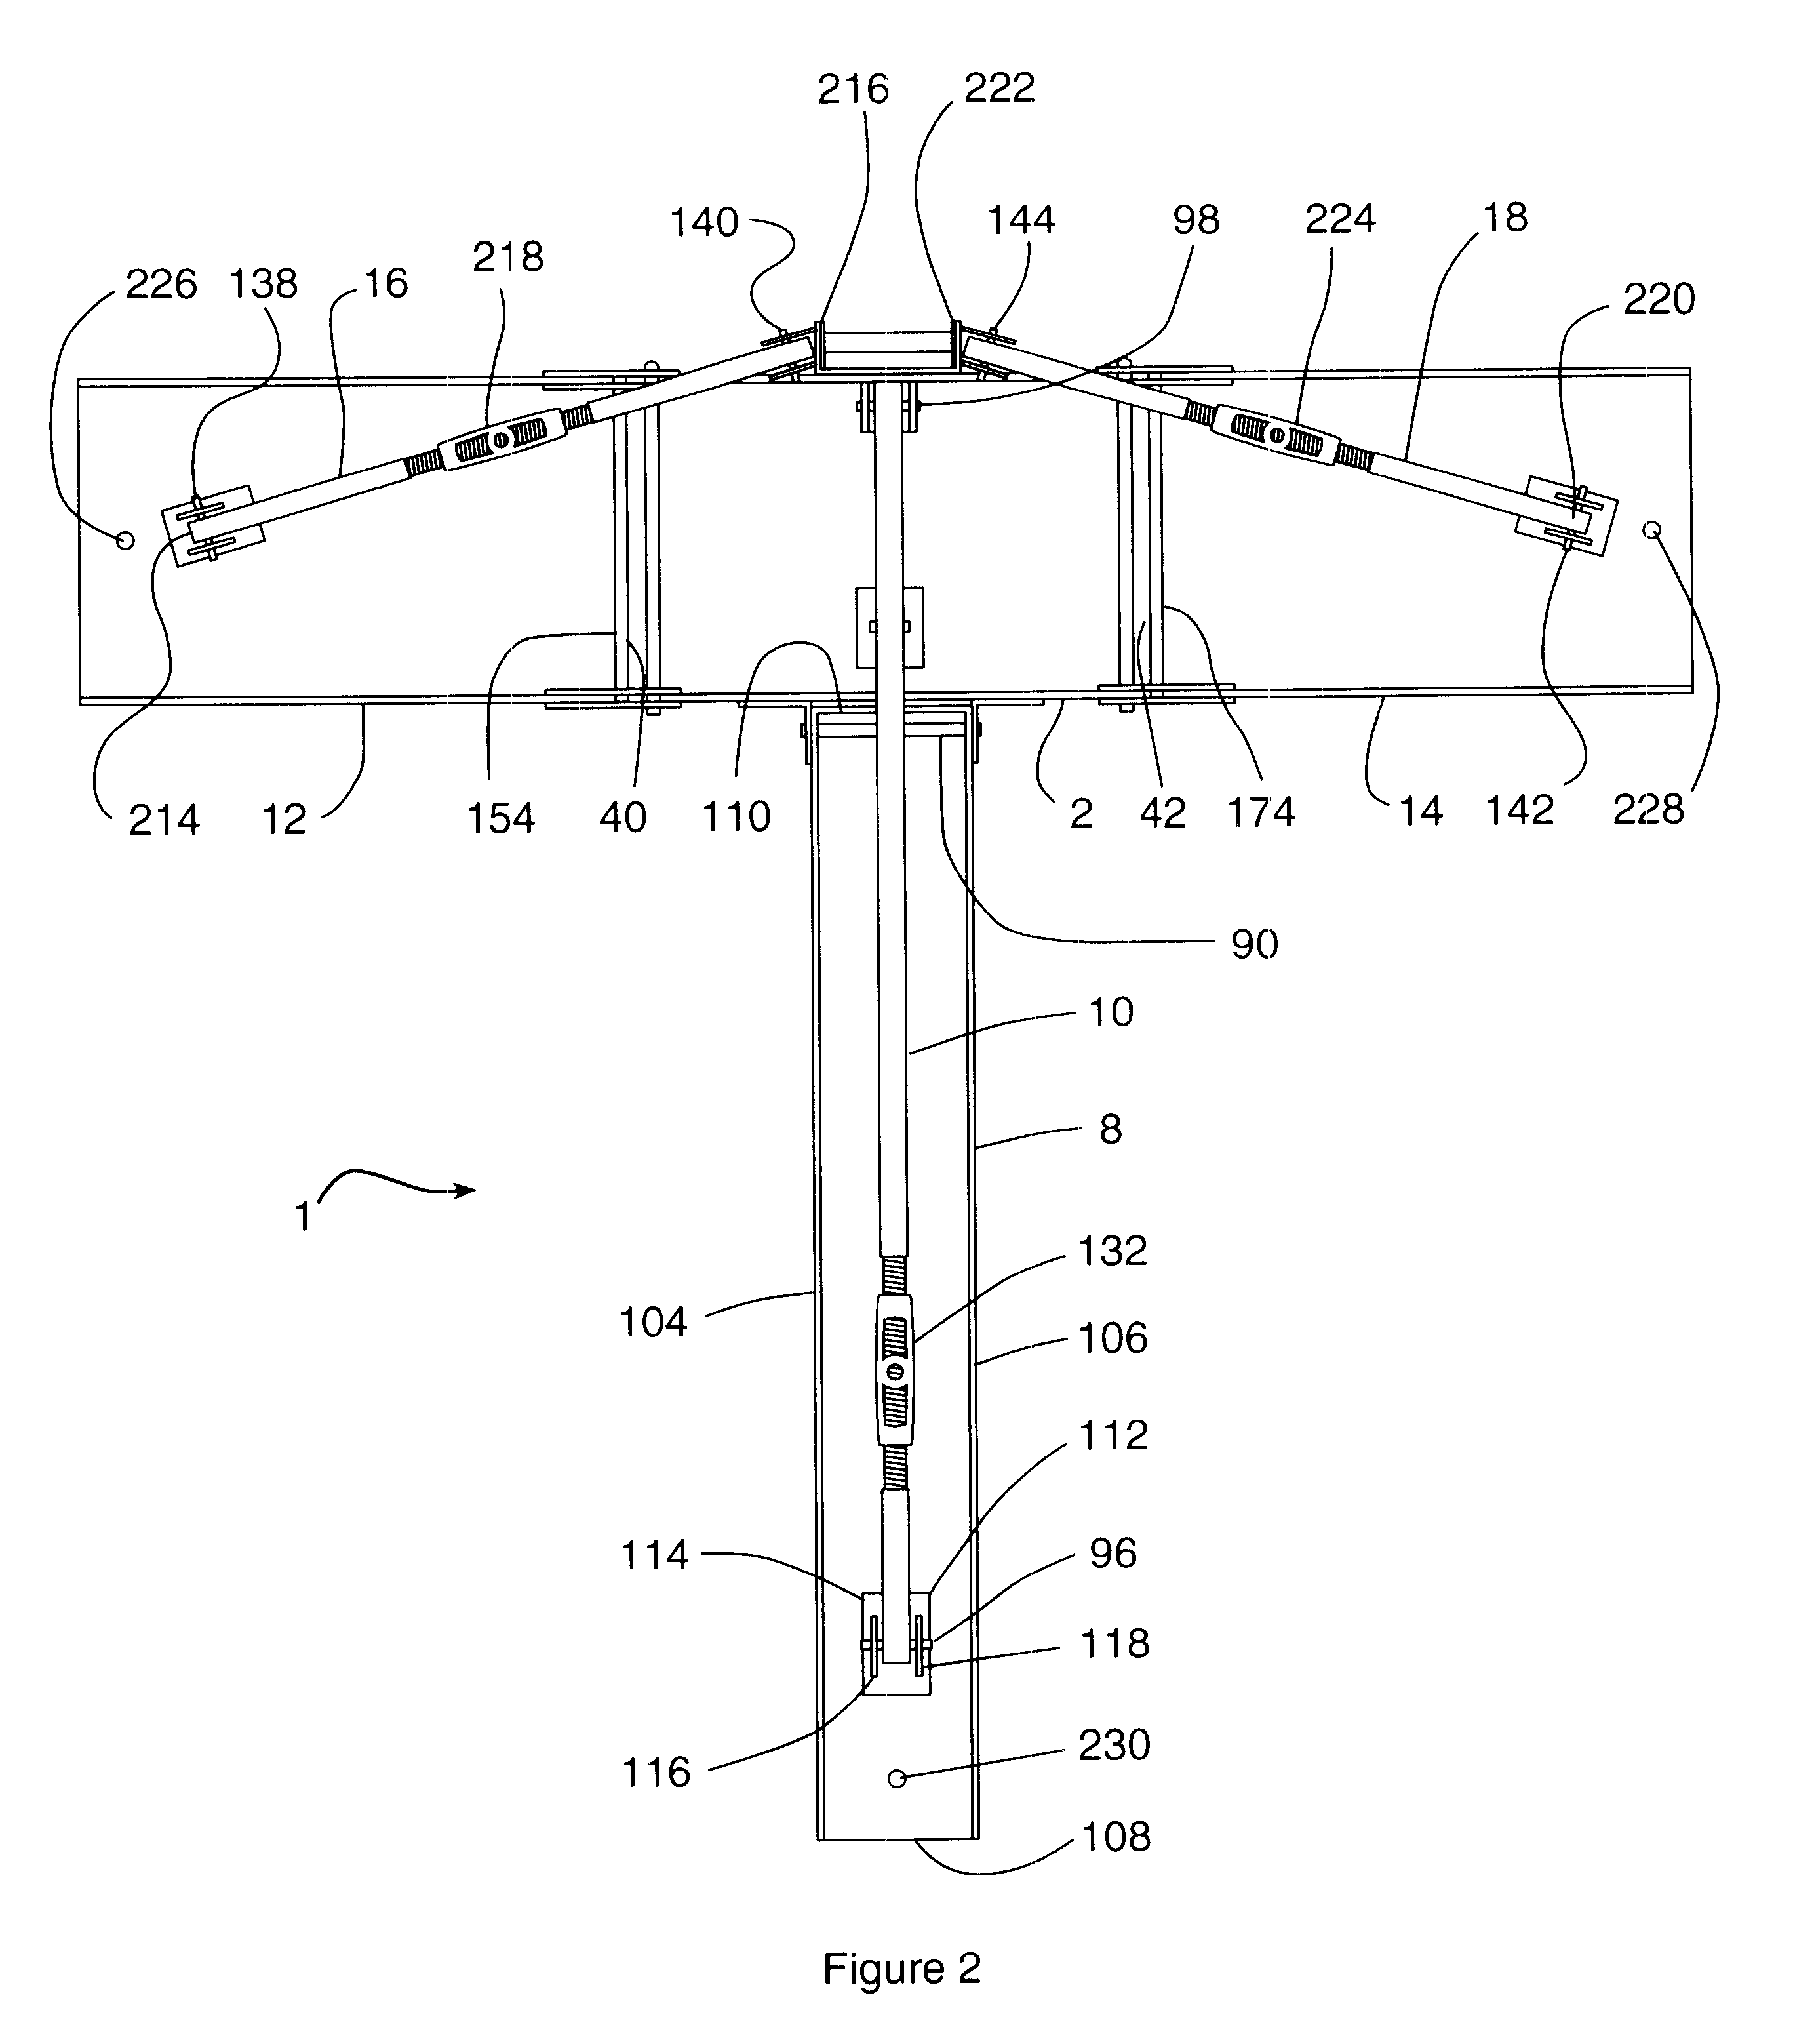 Method and apparatus for maintaining a column in an upright position